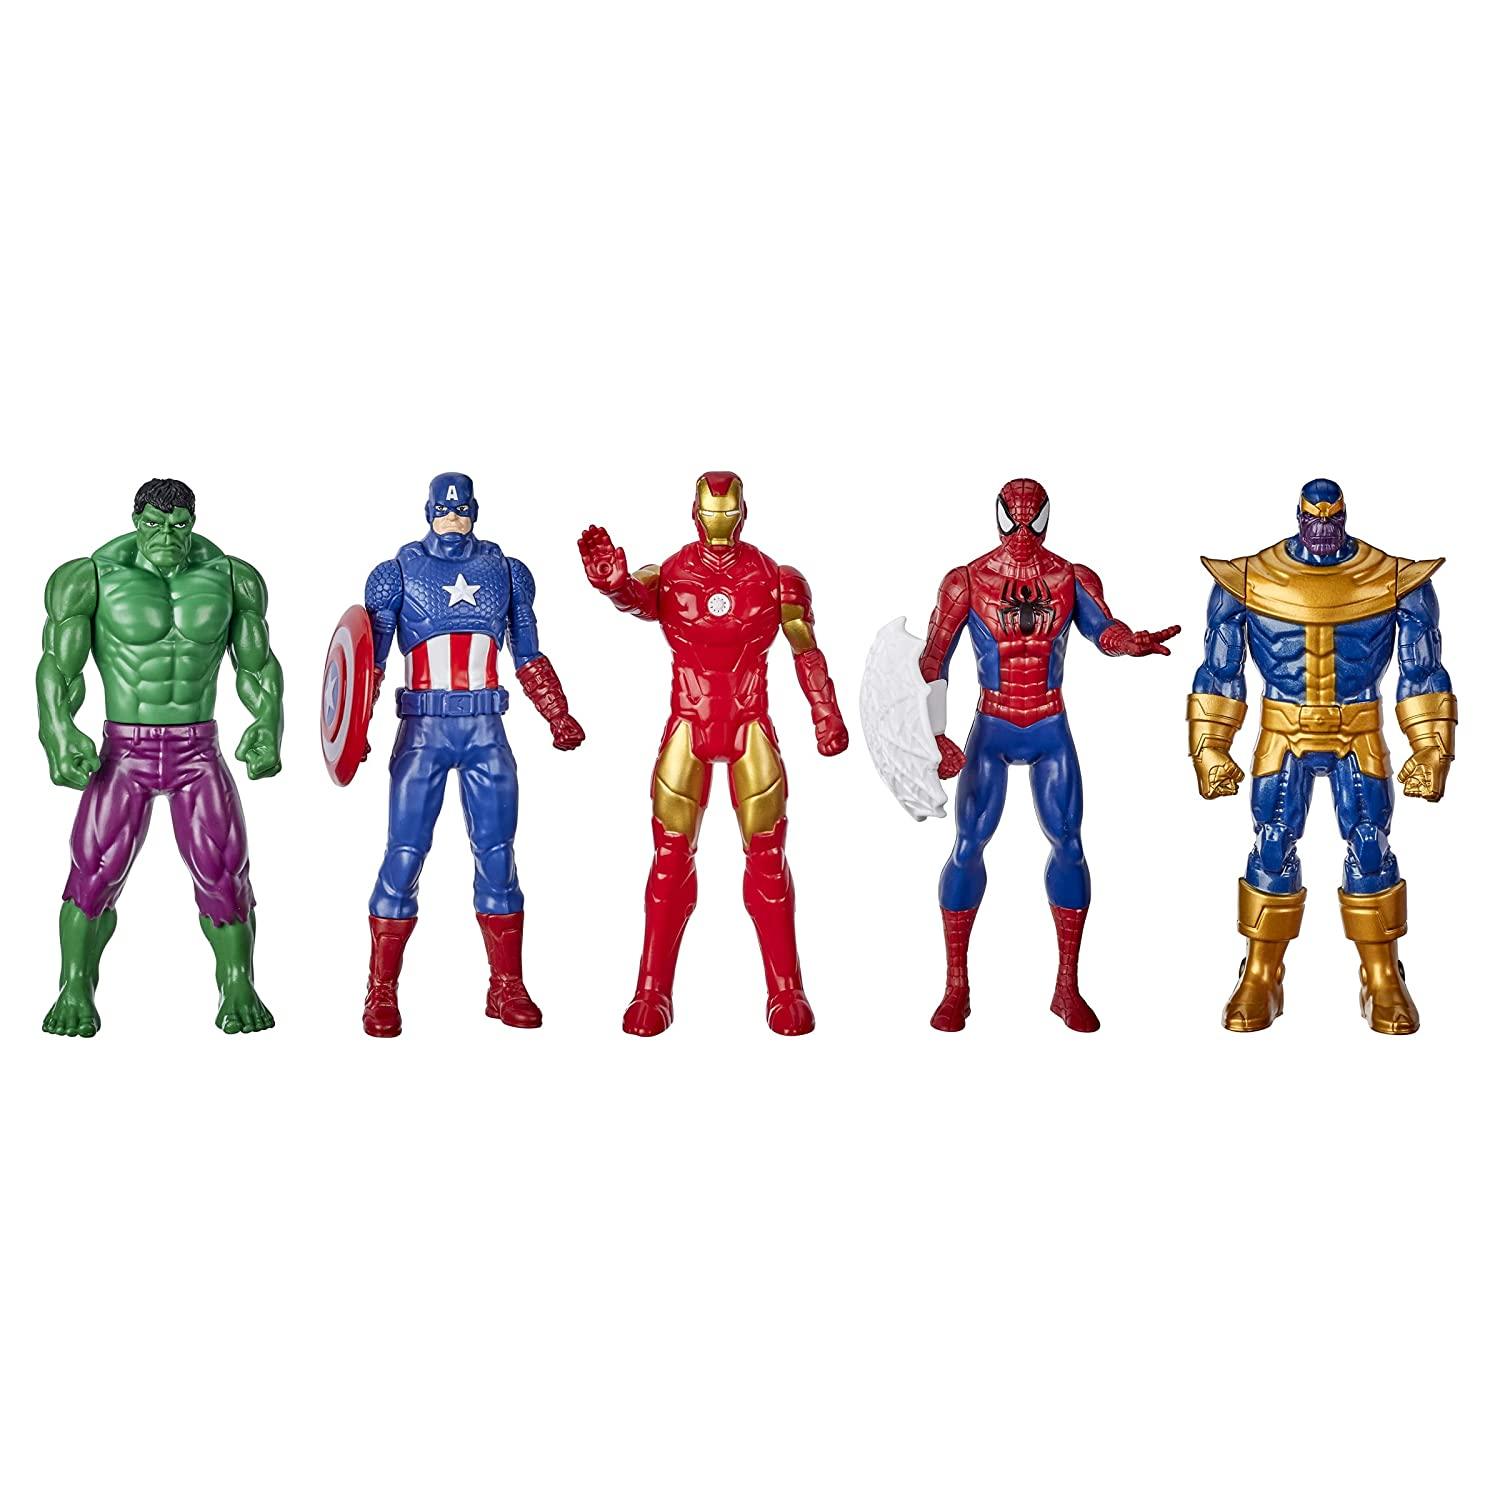 Marvel 6 Inch Super Heroes Iron Man, Spider-Man, Captain America, Hulk, Thanos Action Figure, Pack Of 5 | Hasbro | Sams toy - samstoy.in